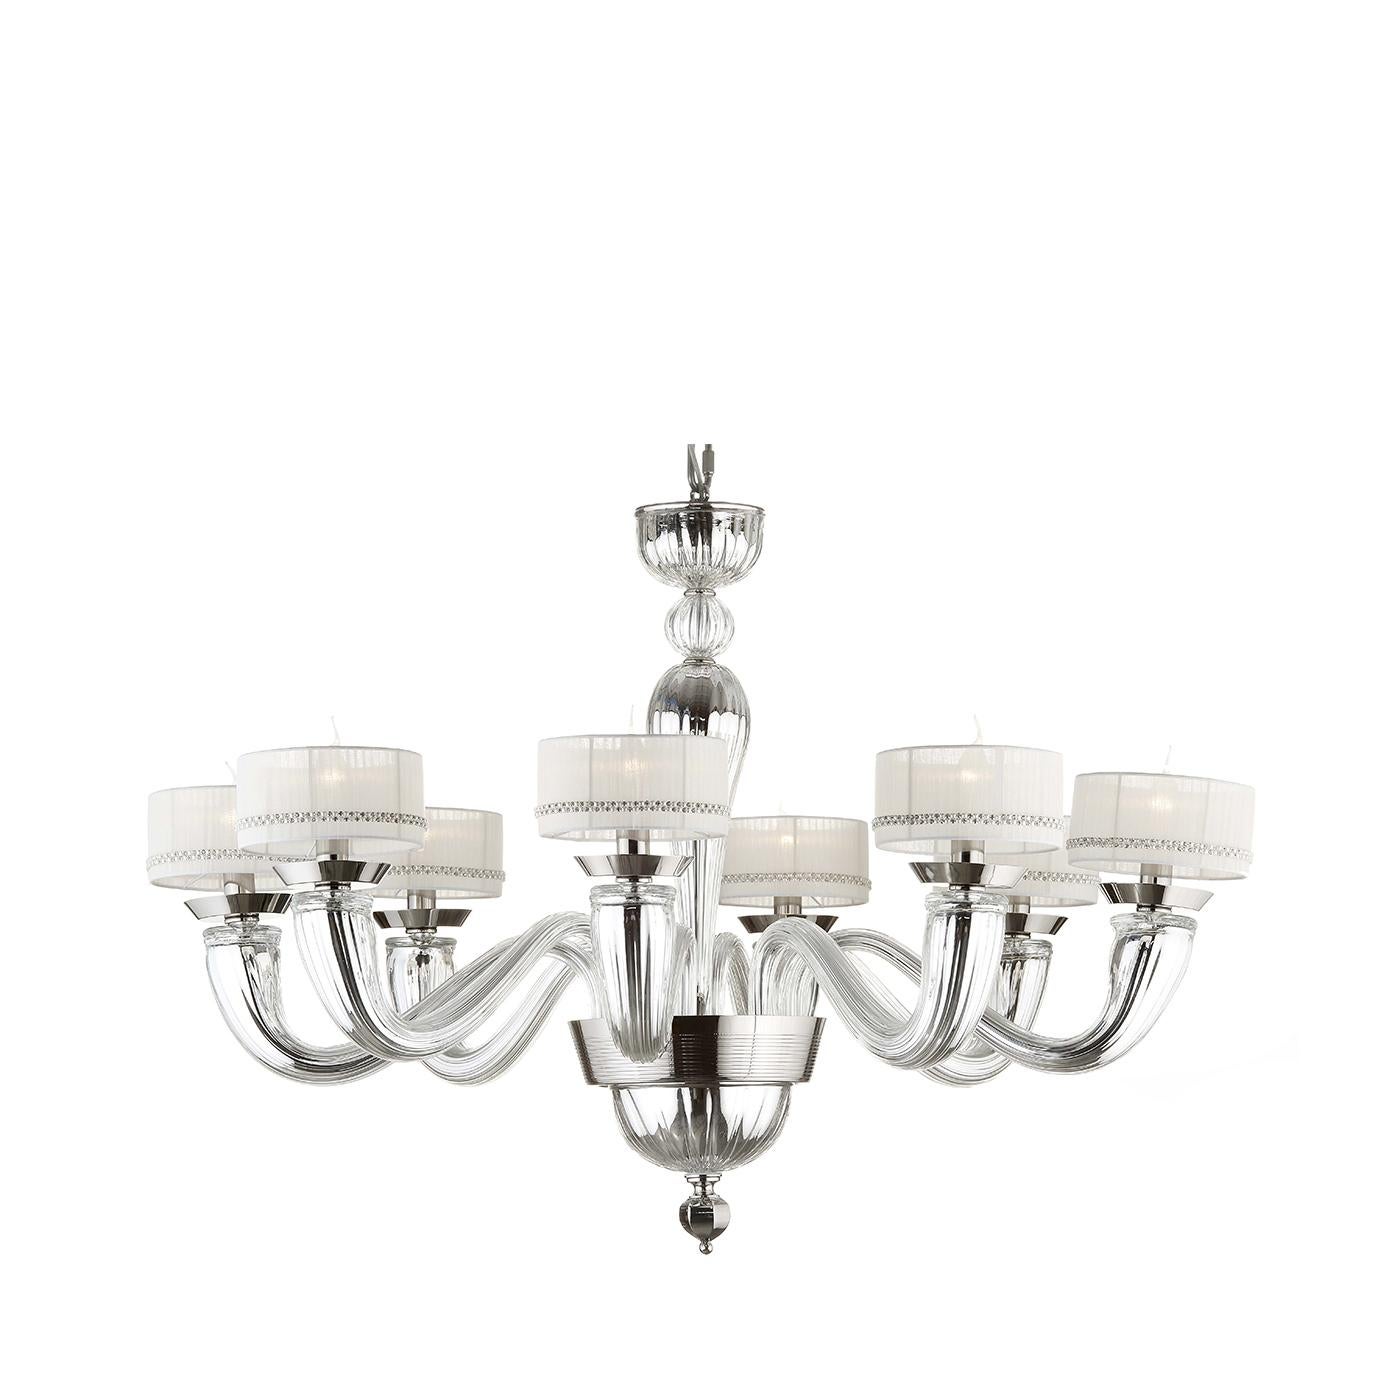 Effortlessly blending Traditional Design and contemporary allure, this chandelier combines centuries-old Venetian glass hand-manufacturing with a modern touch for a timeless chandelier that will make a statement in any decor. Hand-worked metal with